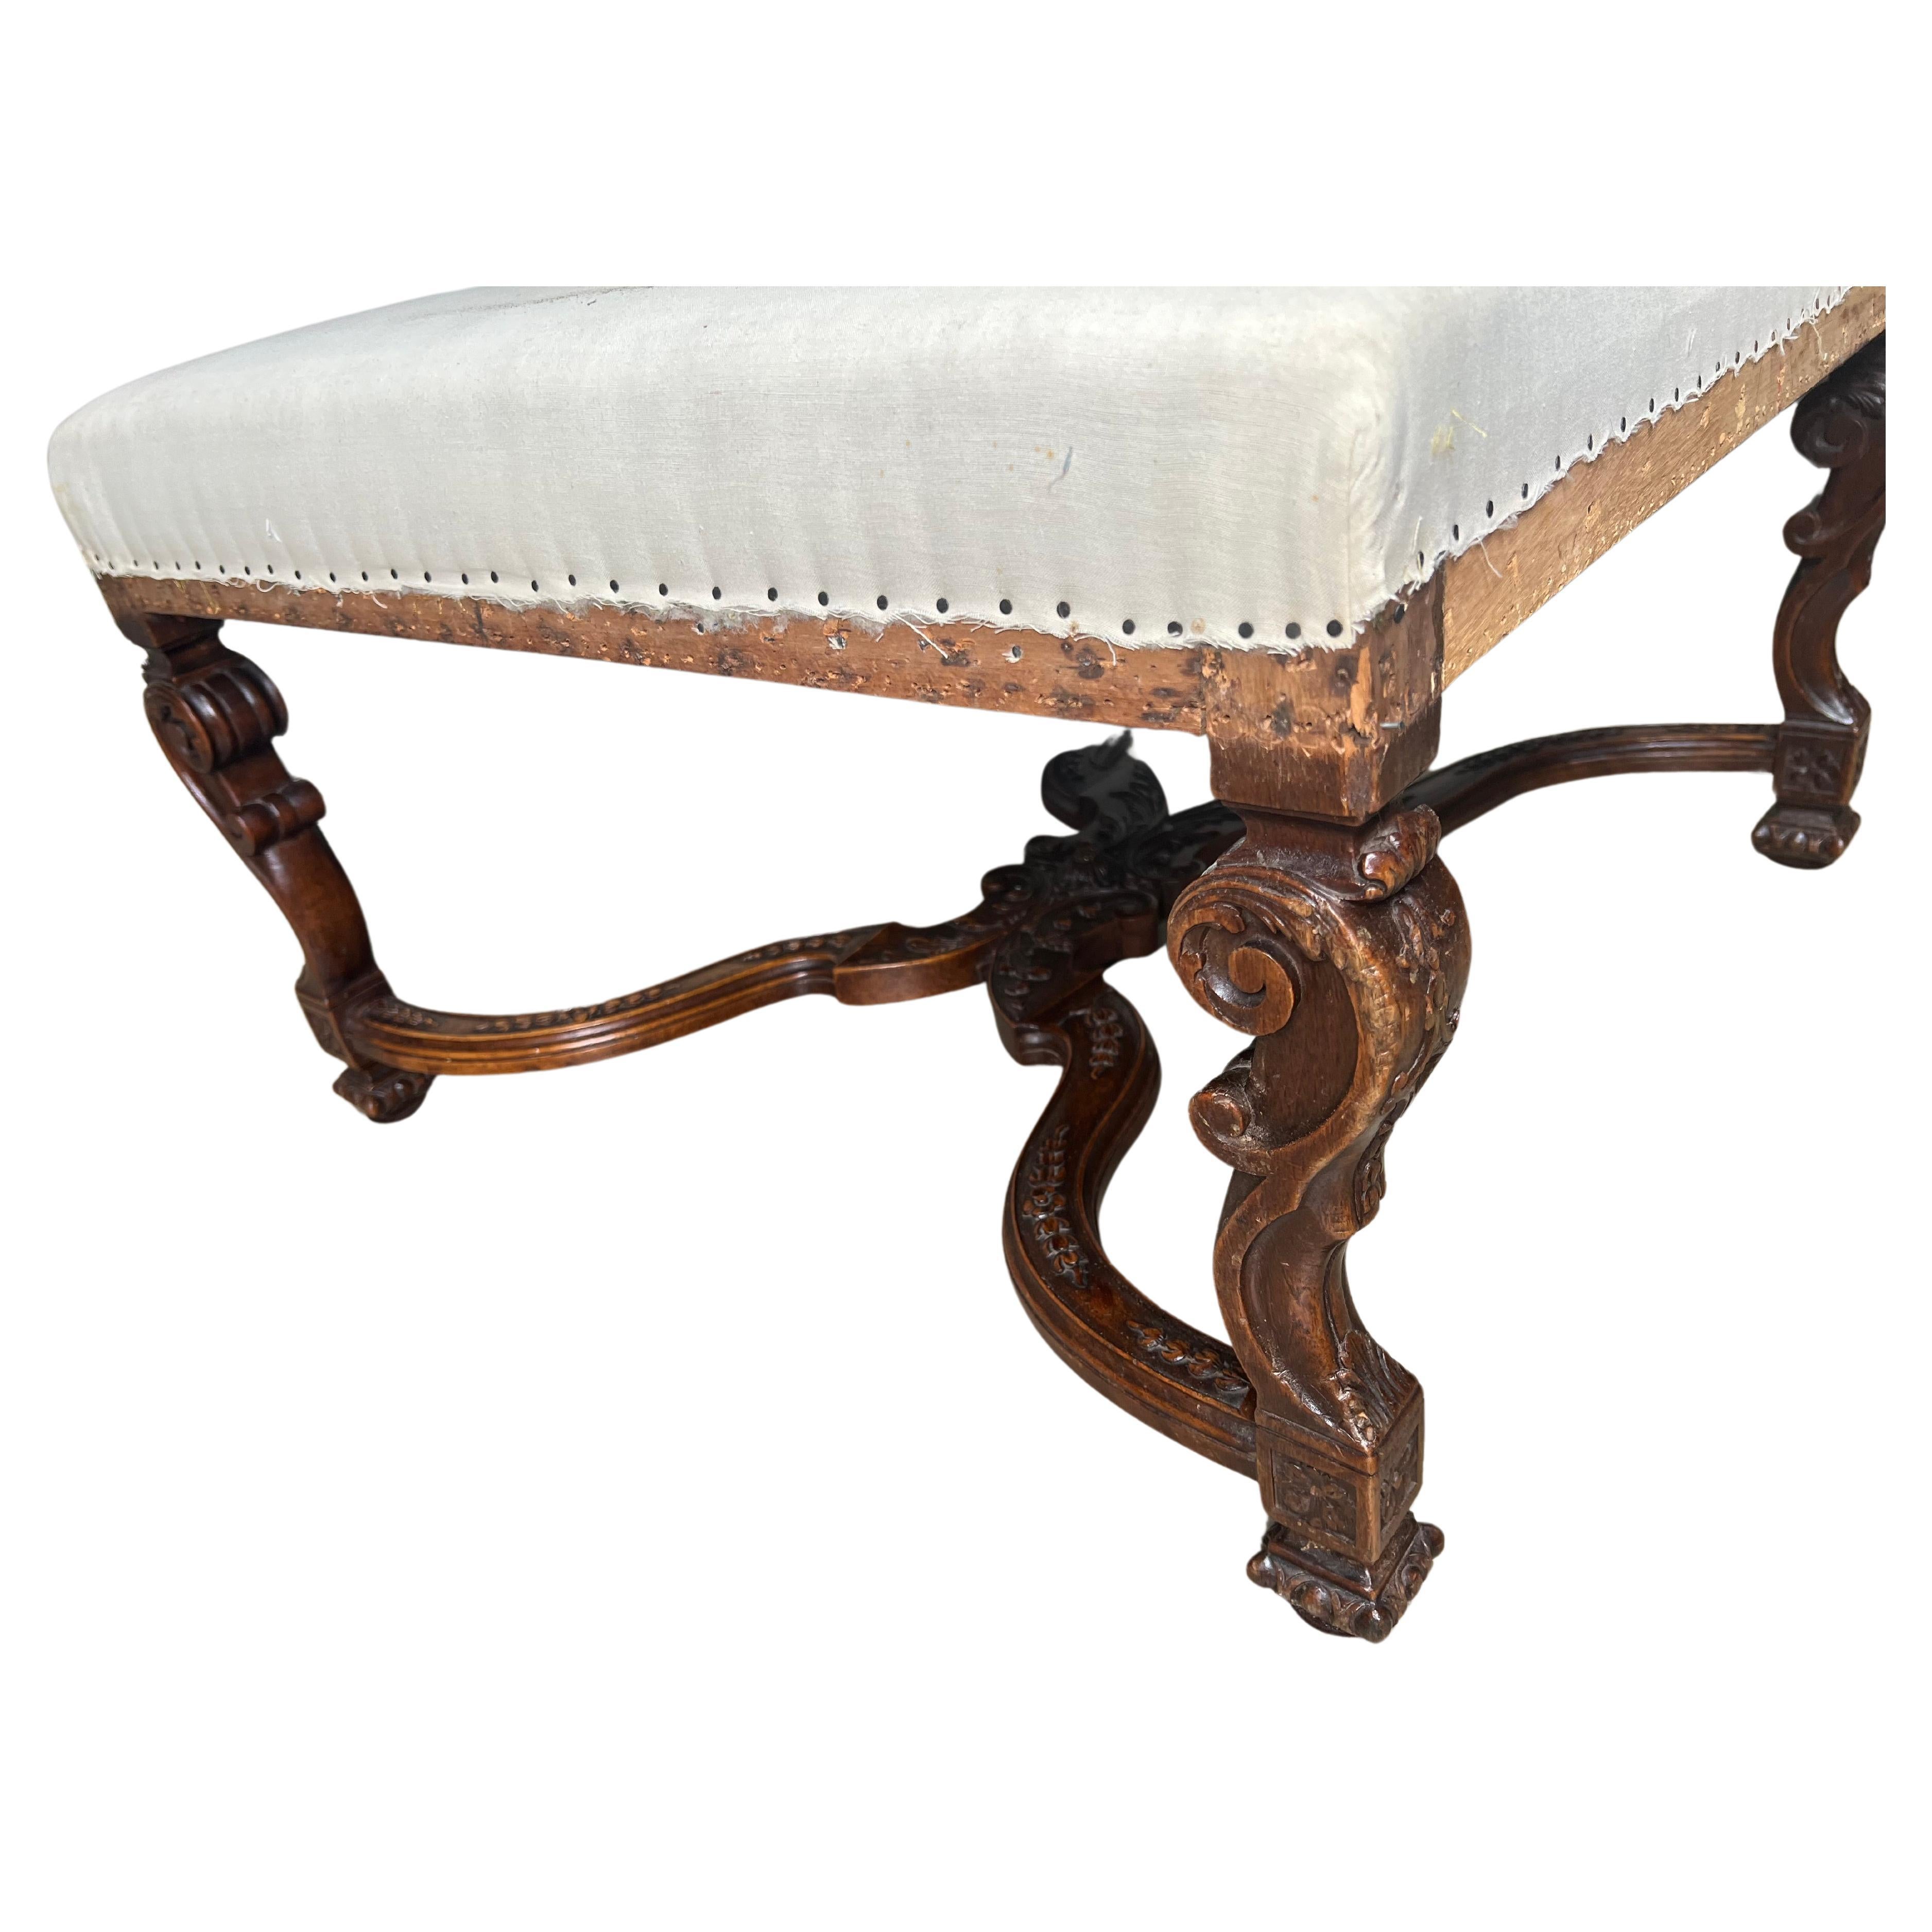 A large French late 19th century carved walnut Regence style ottoman, tabouret.  This ottoman is beautifully carved with an X stretcher and scrolled legs.  It is very decorative and functional and could double as a coffee table with tray.  The seat